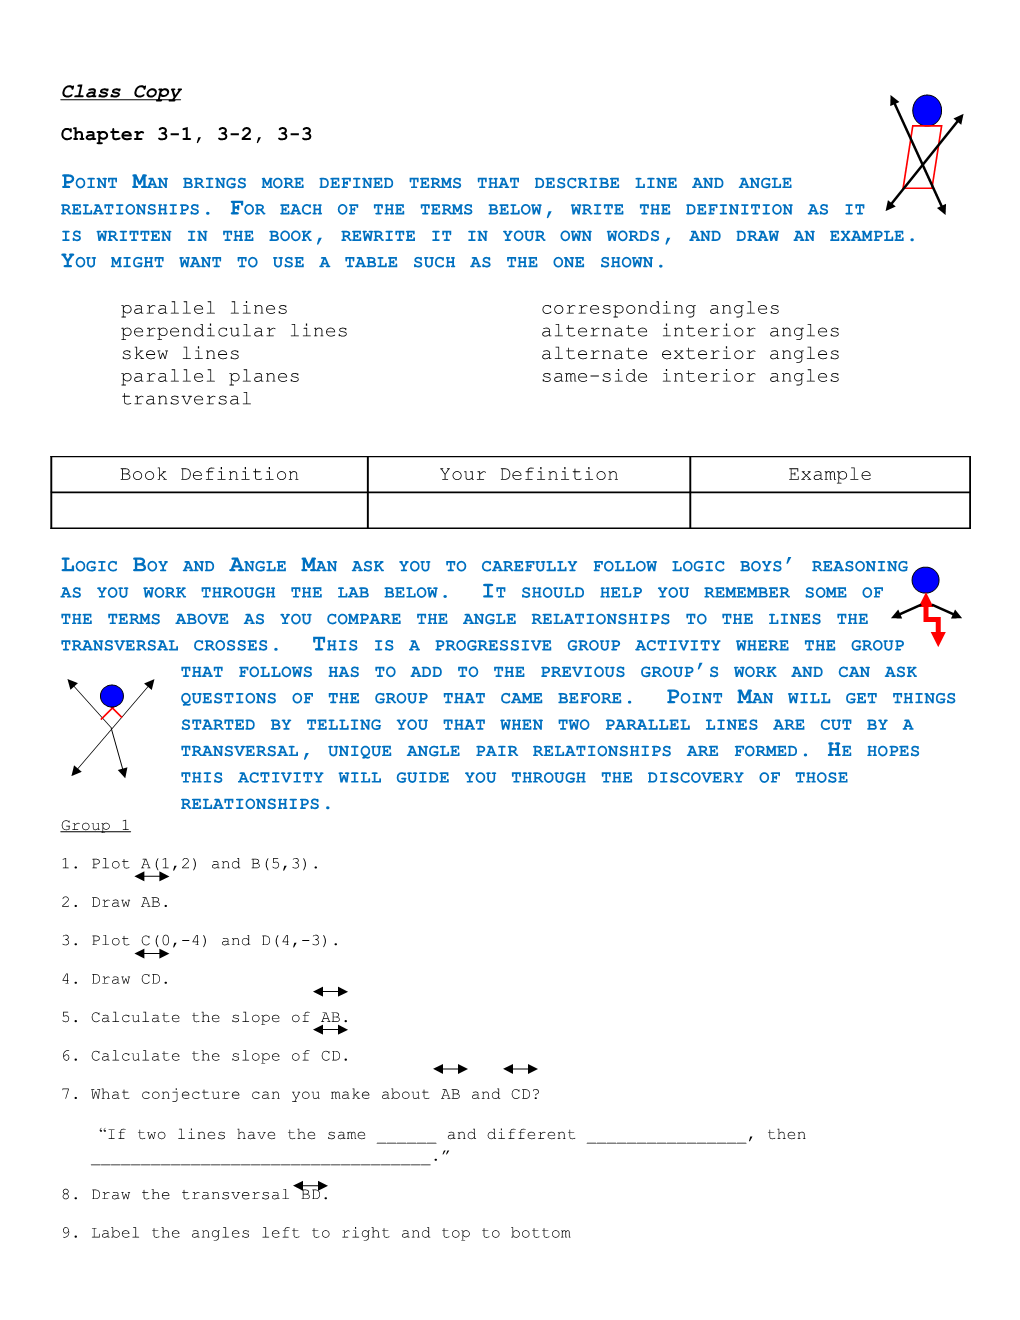 Point Man Brings More Defined Terms That Describe Line and Angle Relationships. for Each